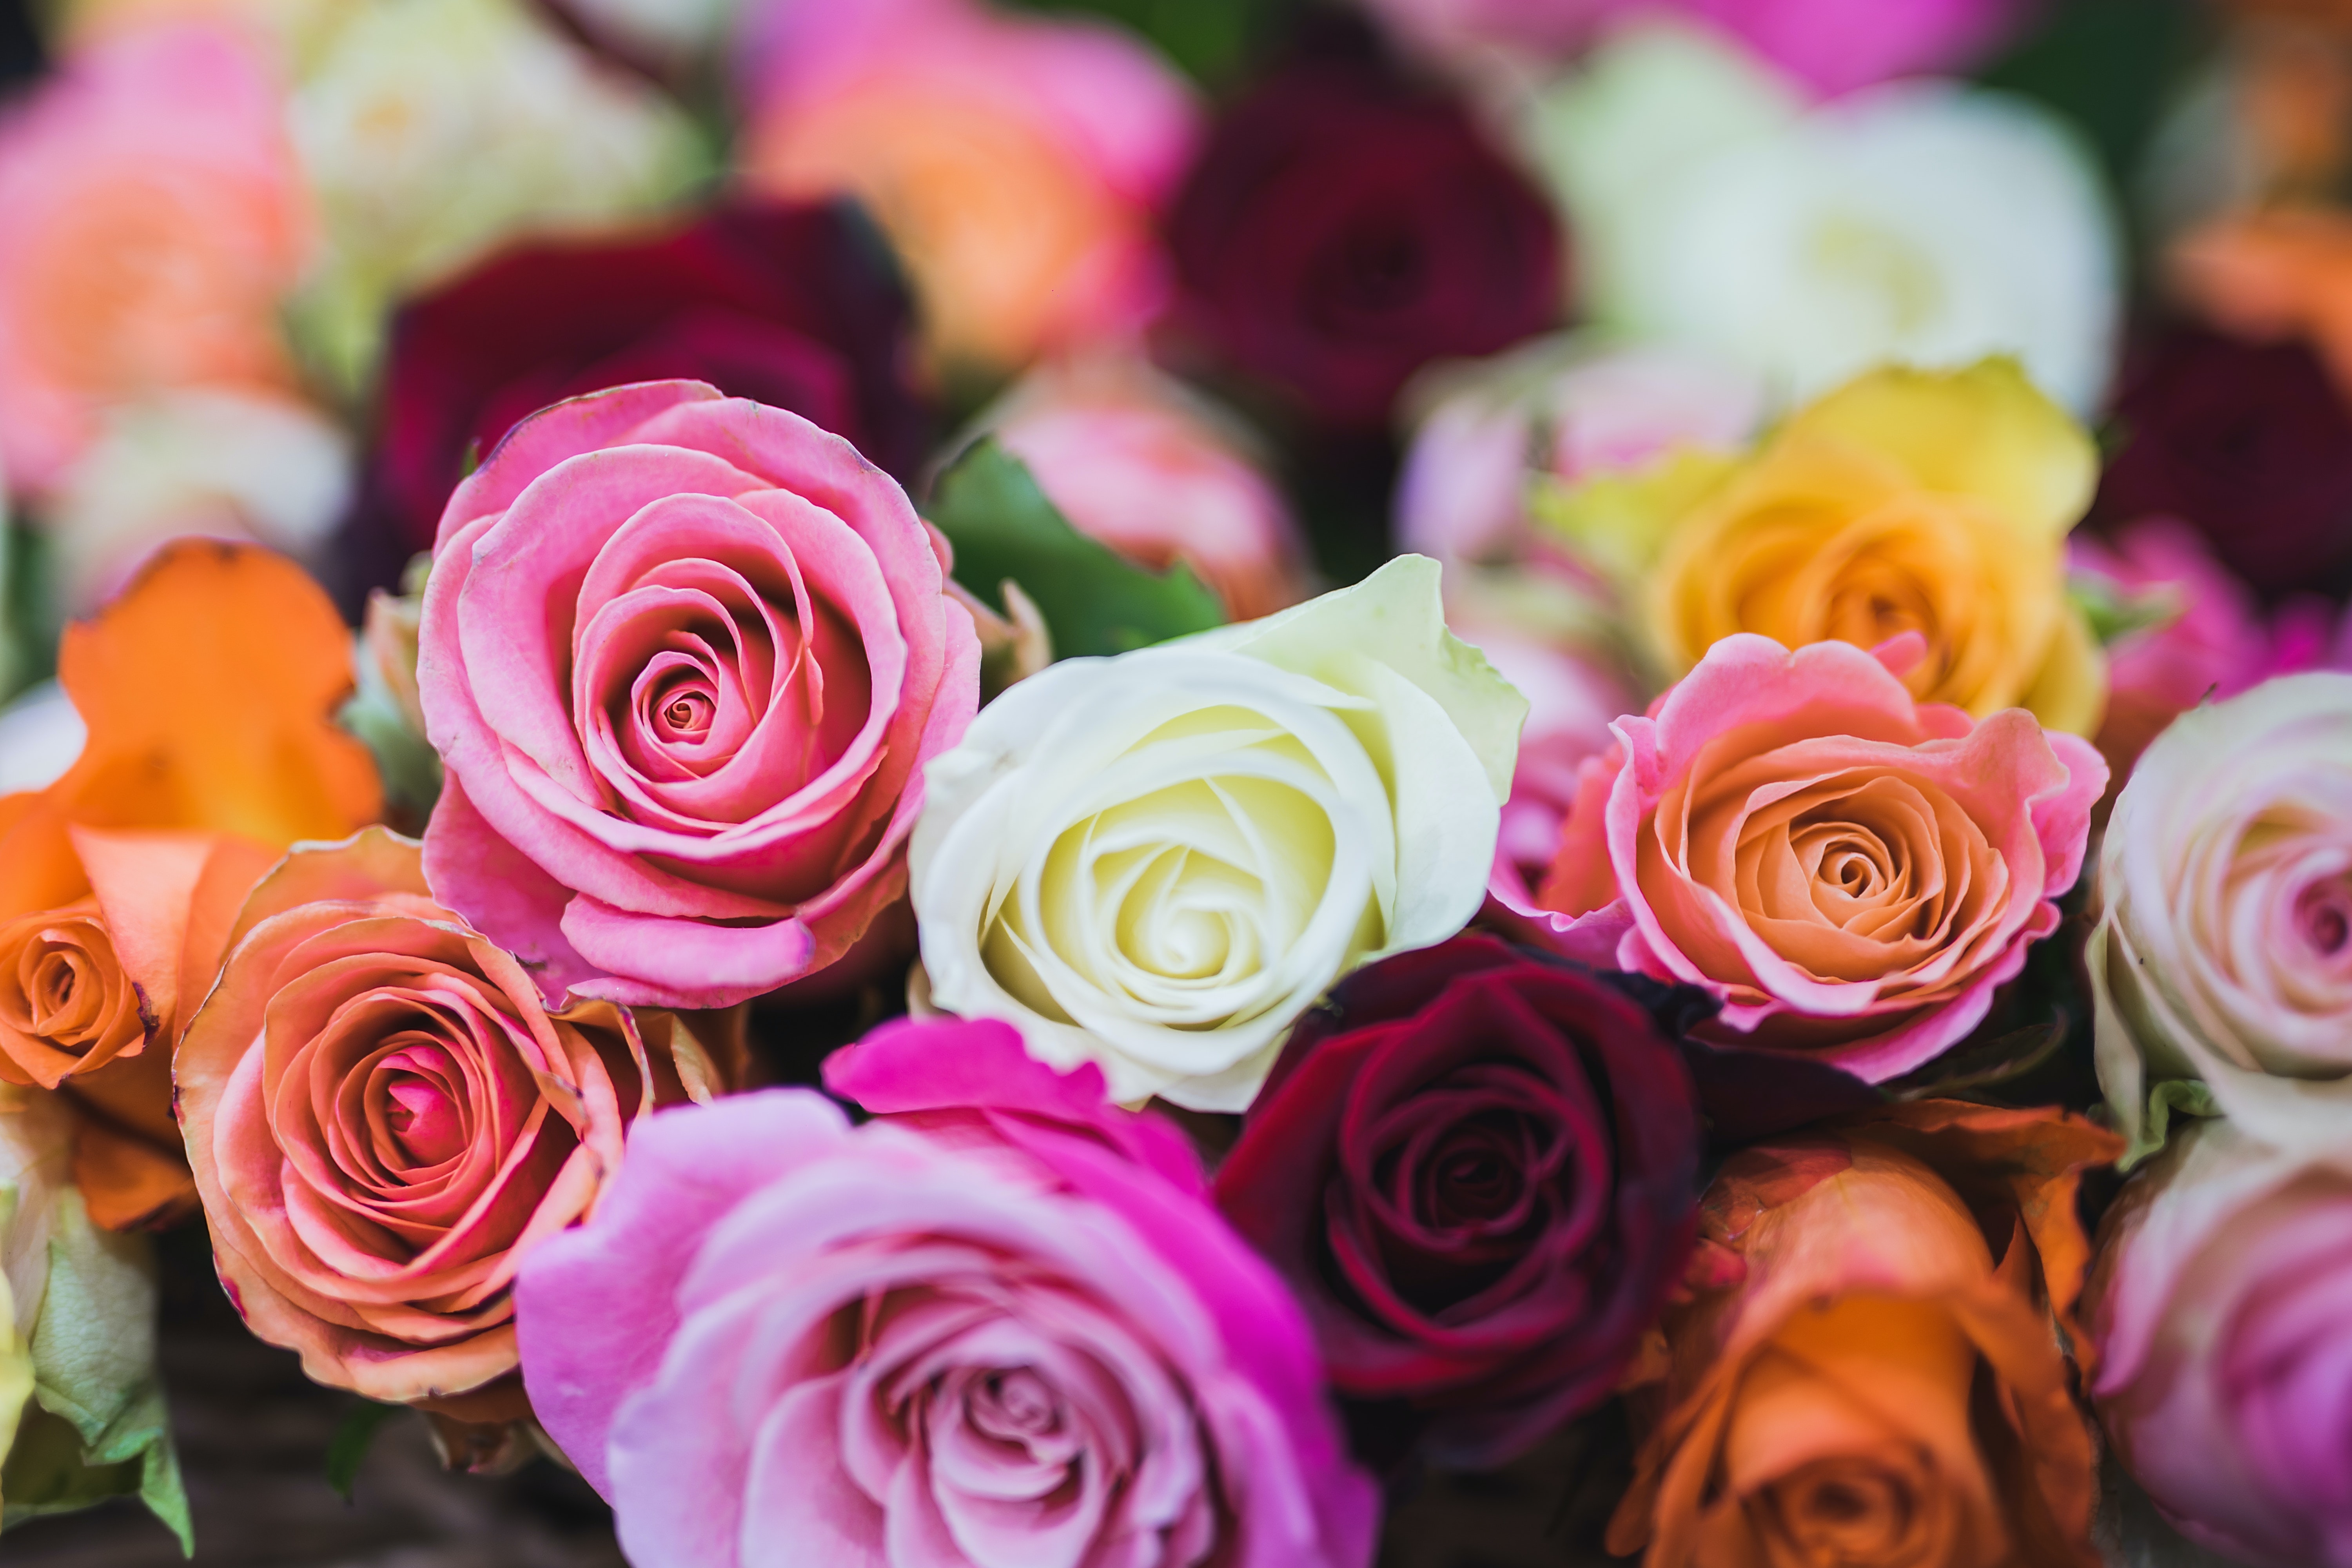 Different Colors of Rose Flowers and Their Meanings